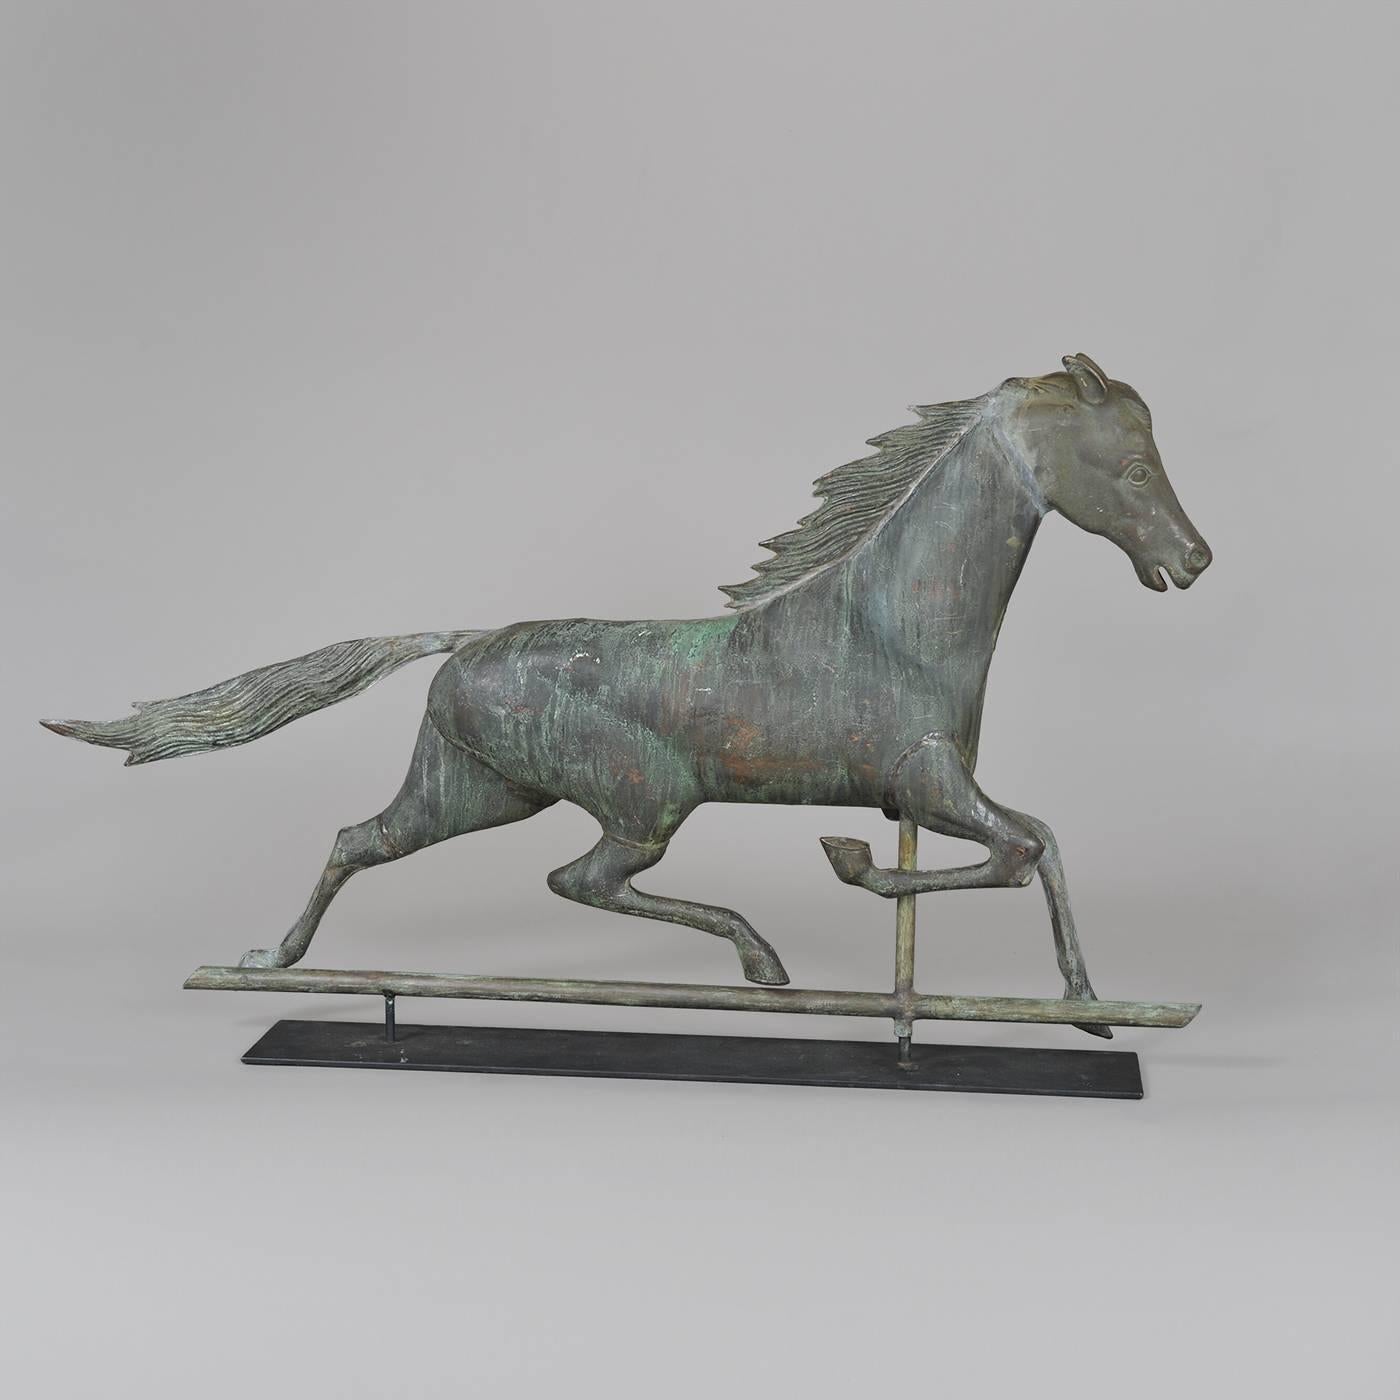 This imposing size Trotting Horse Weathervane known as ”Nelson” was made by J.L. Mott iron works of New York, circa. 1890s. Full body is mad in copper and a cast zinc head. The piece is in very good condition with greenish verdigris